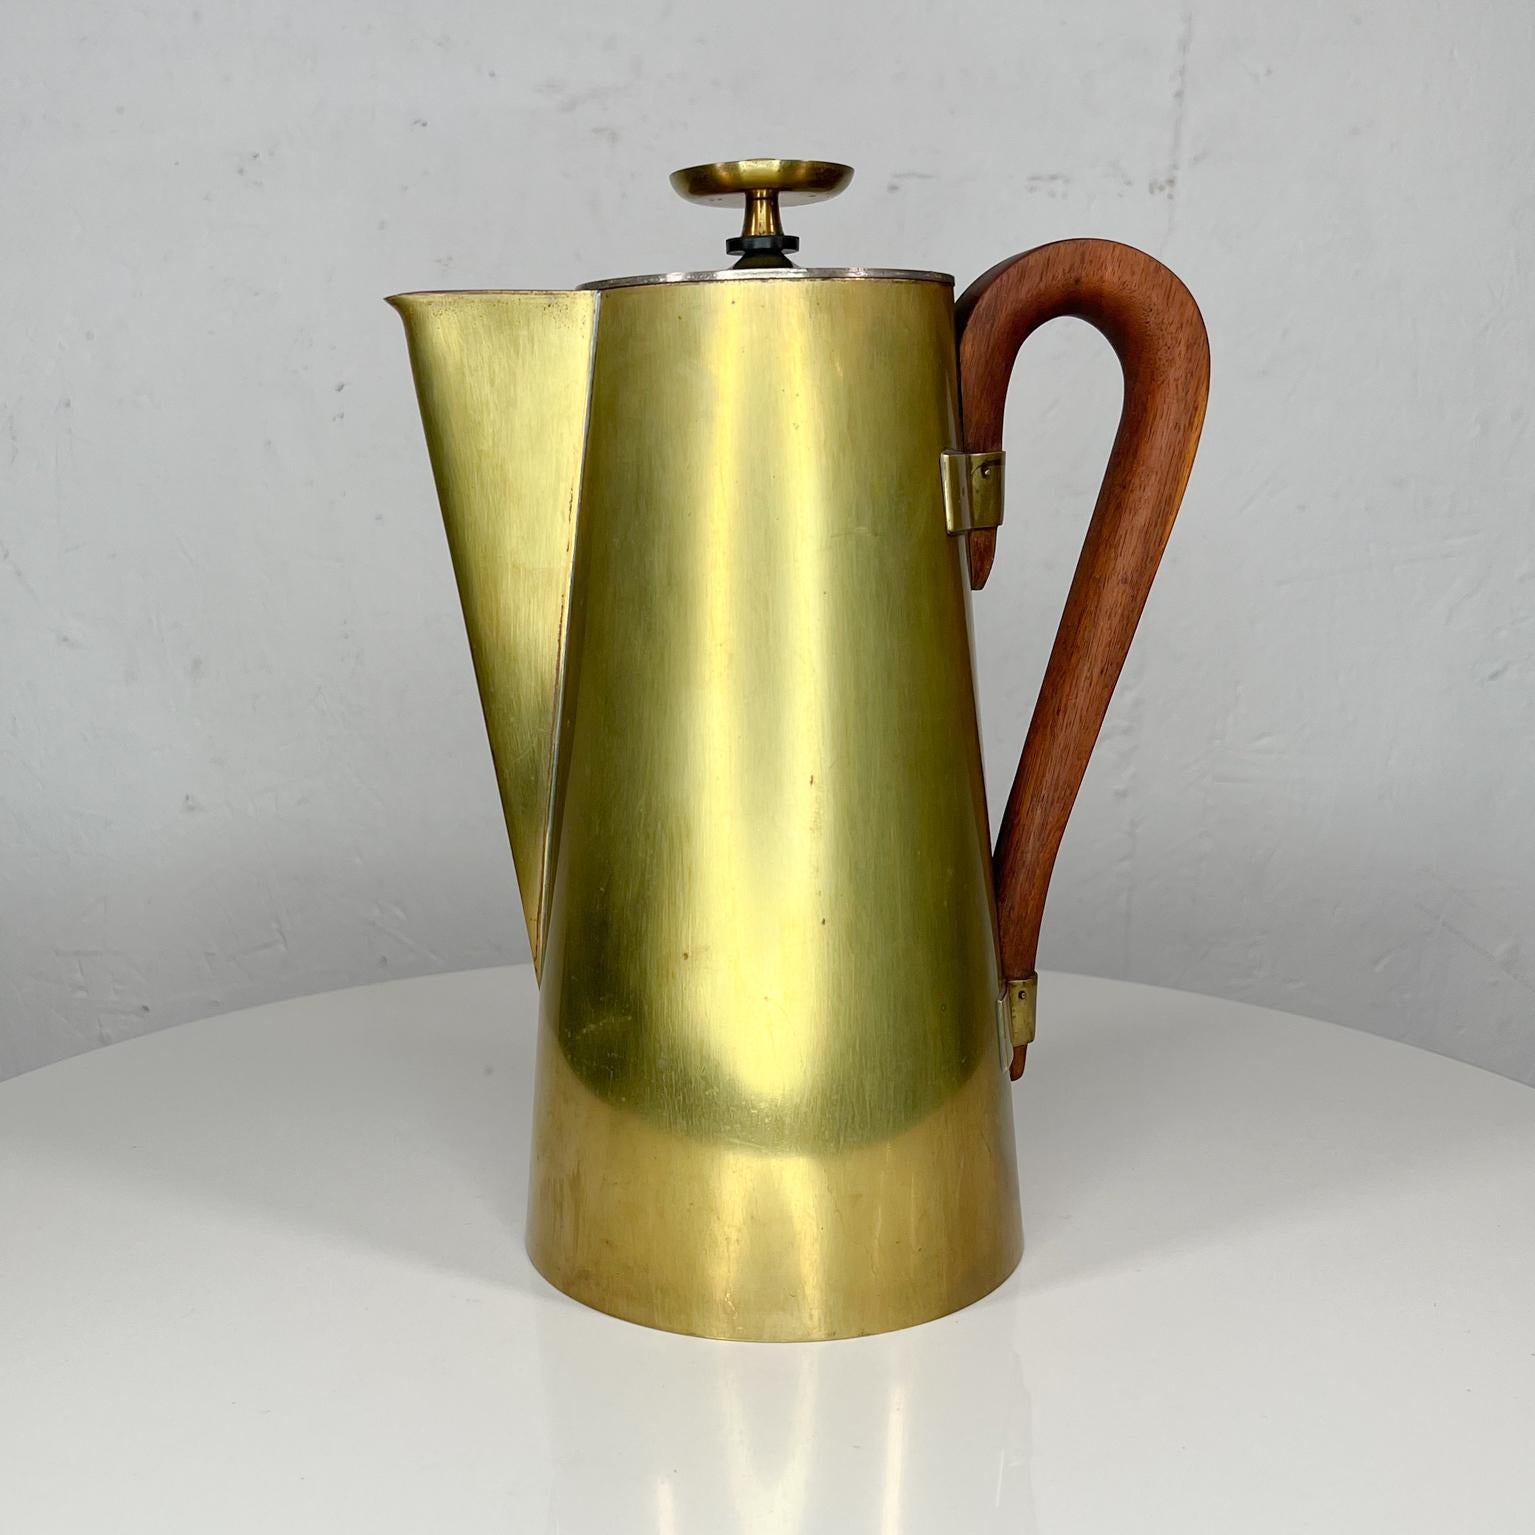 Designer Tommi Parzinger modern brass coffee tea service pot with silverplate. Sculptural walnut wood handle.
Stamped Dorlyn Silversmiths. 
Measures: 12 tall x 8.5 depth x 5.5 diameter
Unrestored vintage condition with patina
Refer to all